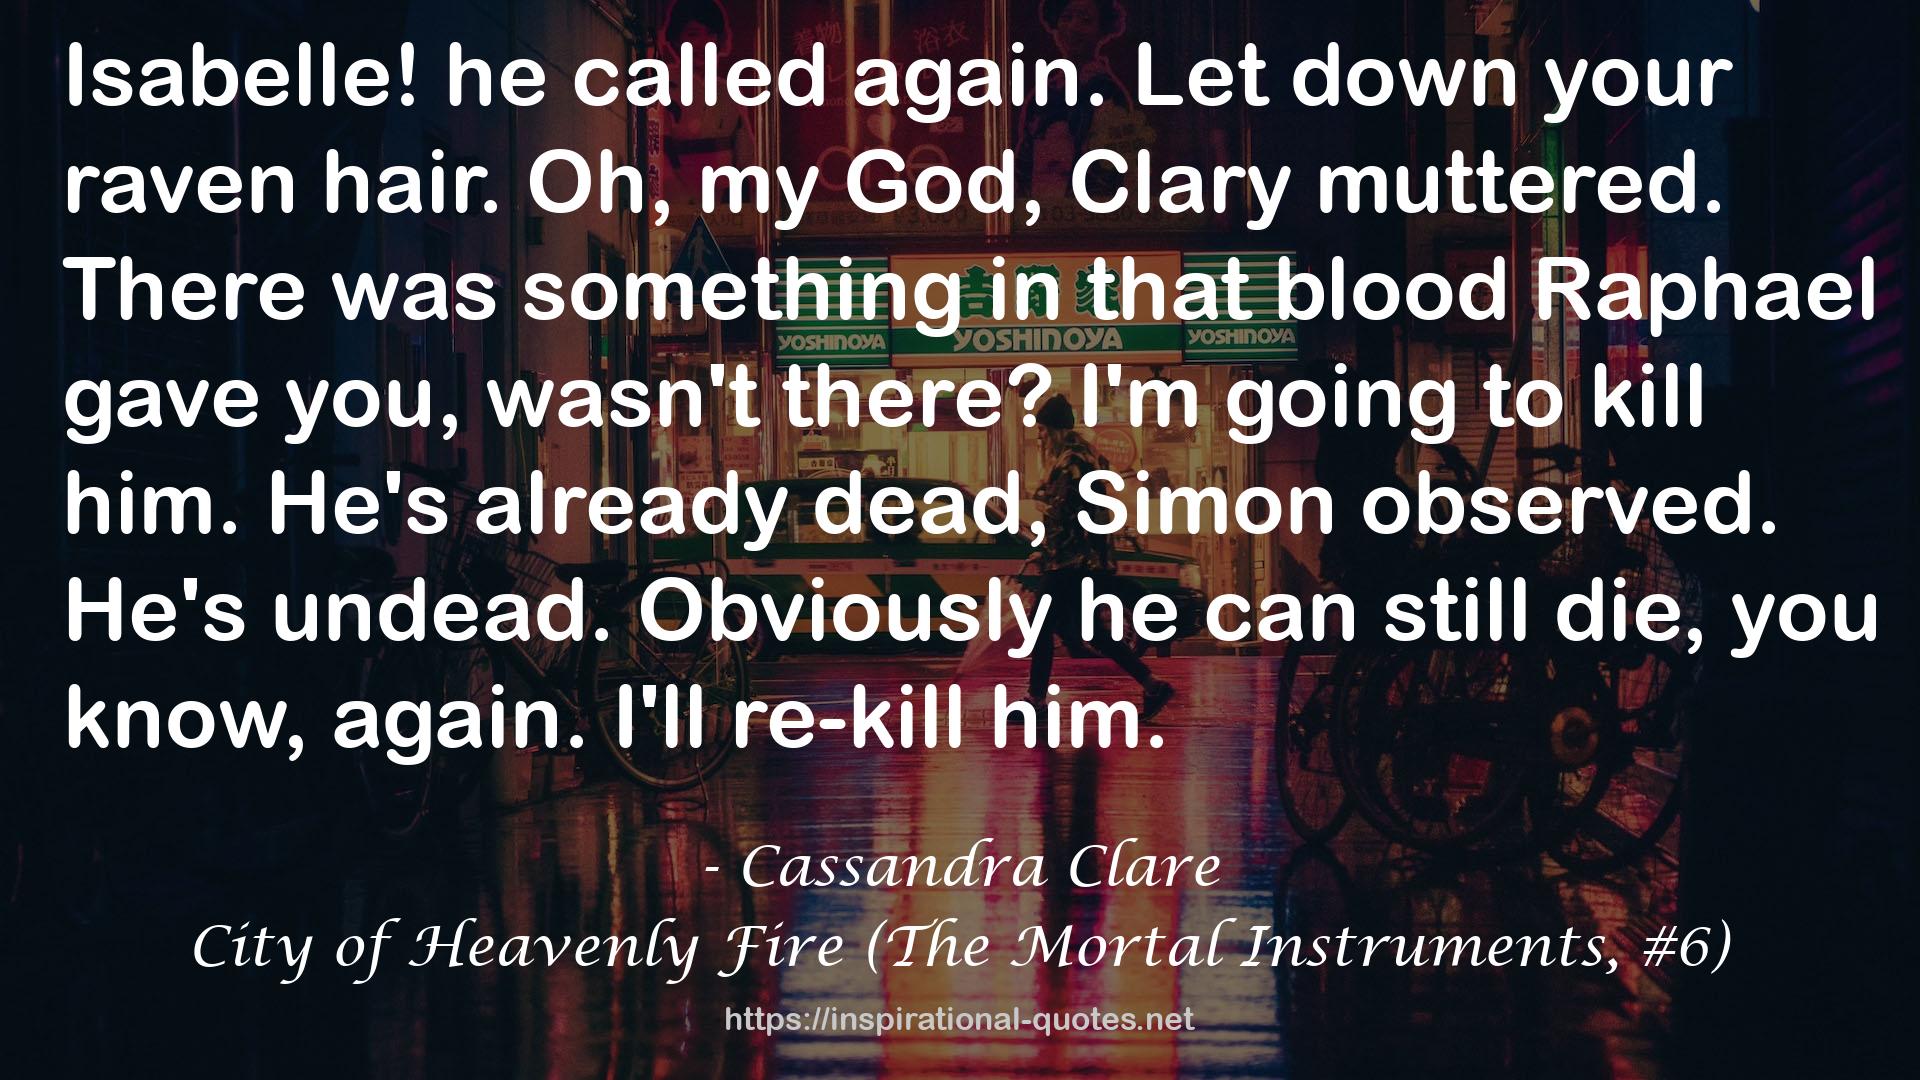 City of Heavenly Fire (The Mortal Instruments, #6) QUOTES